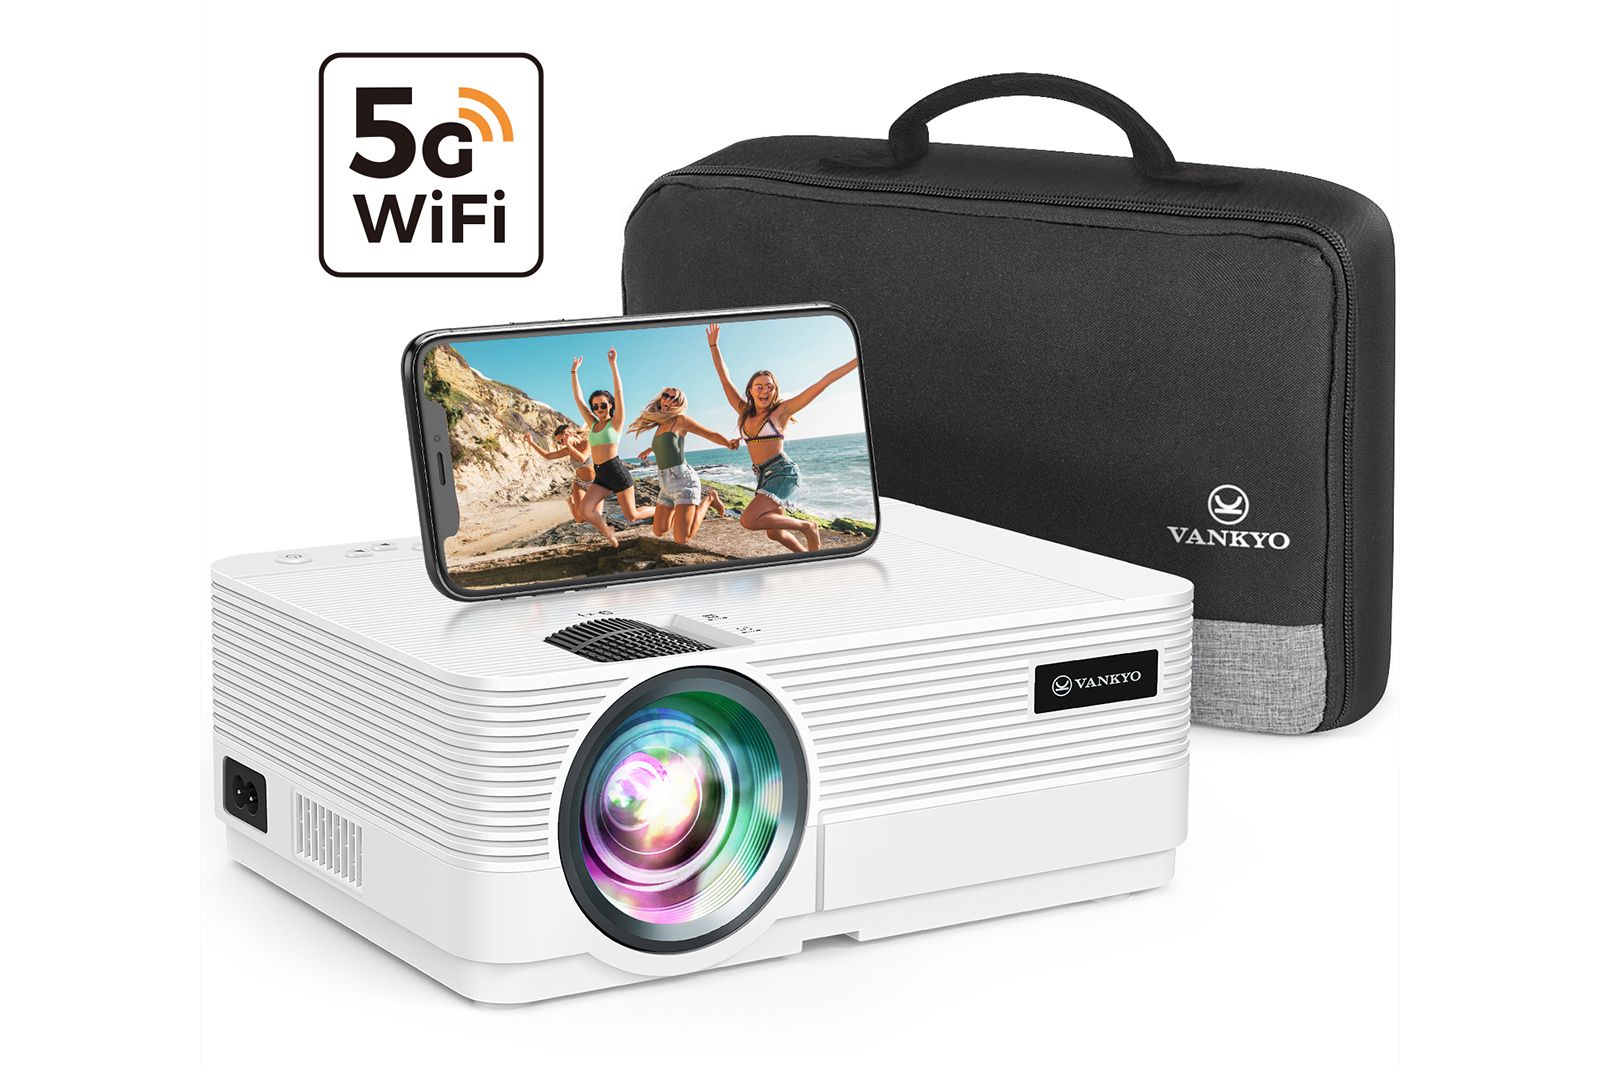 Meet VANKYO Leisure 470 Pro, one of the smallest outdoor native 1080P LCD projectors on the market photo 5